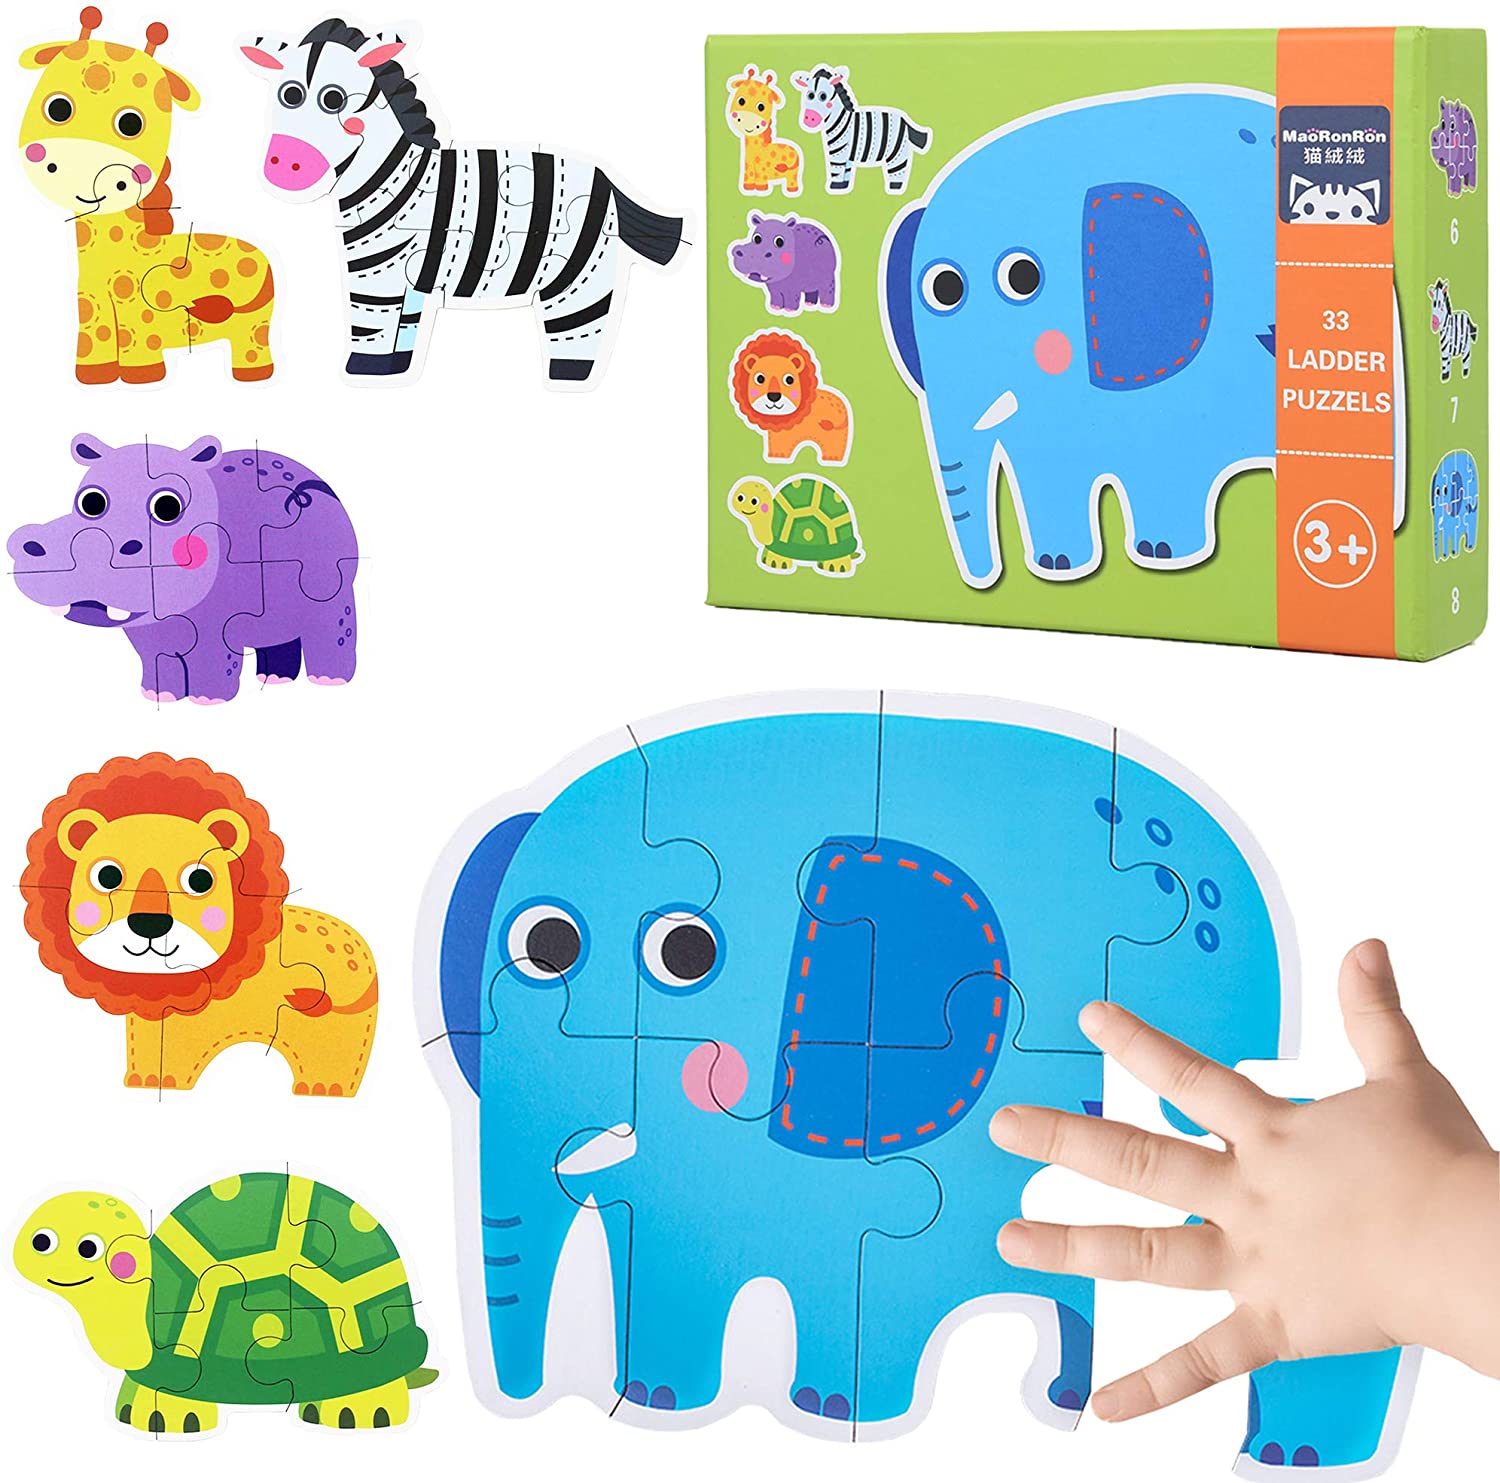 Puzzles for Toddlers Ages 2 3 4 5 Years Old, Safari Animals Floor Jigsaw  Puzzles for Beginner, Educational Gifts for Girls Boys Kids by Flyingseeds,  6 Pack | Lazada Singapore